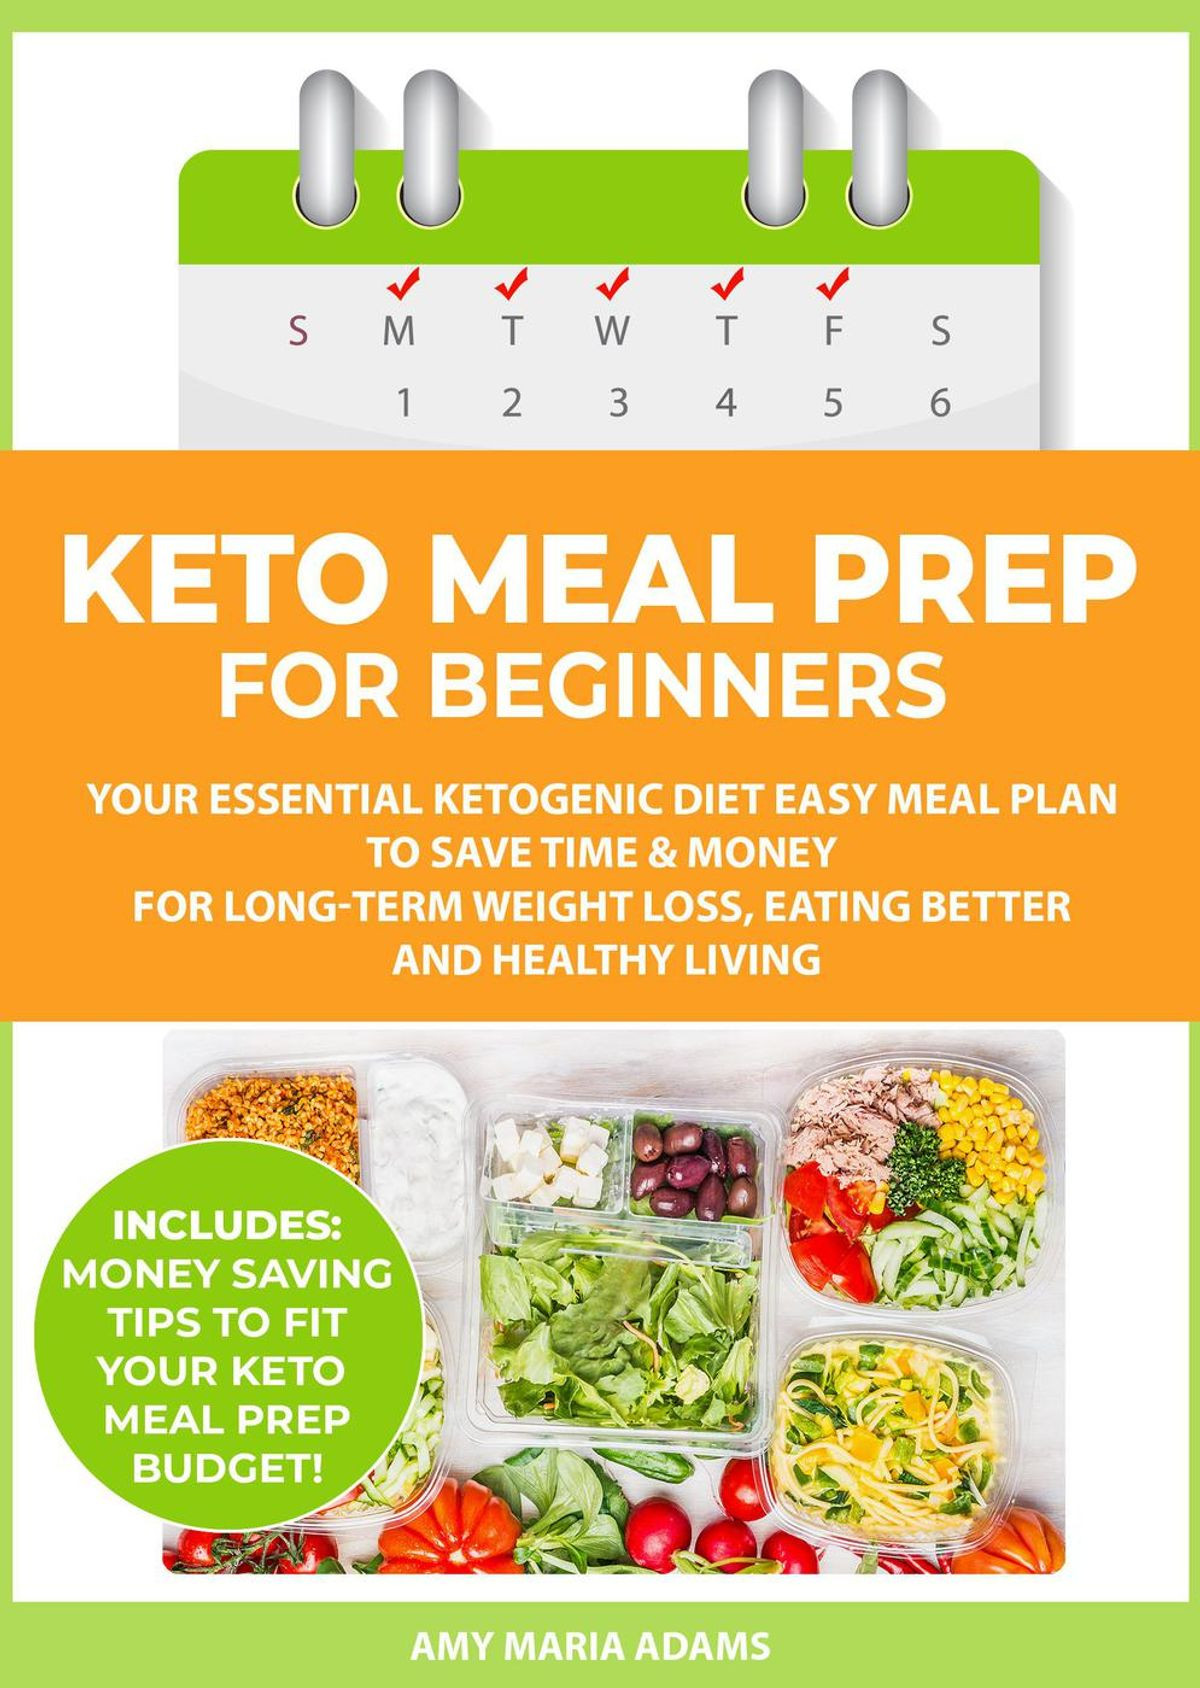 Keto Diet For Beginners Meal Prep
 Keto Meal Prep for Beginners Your Essential Ketogenic